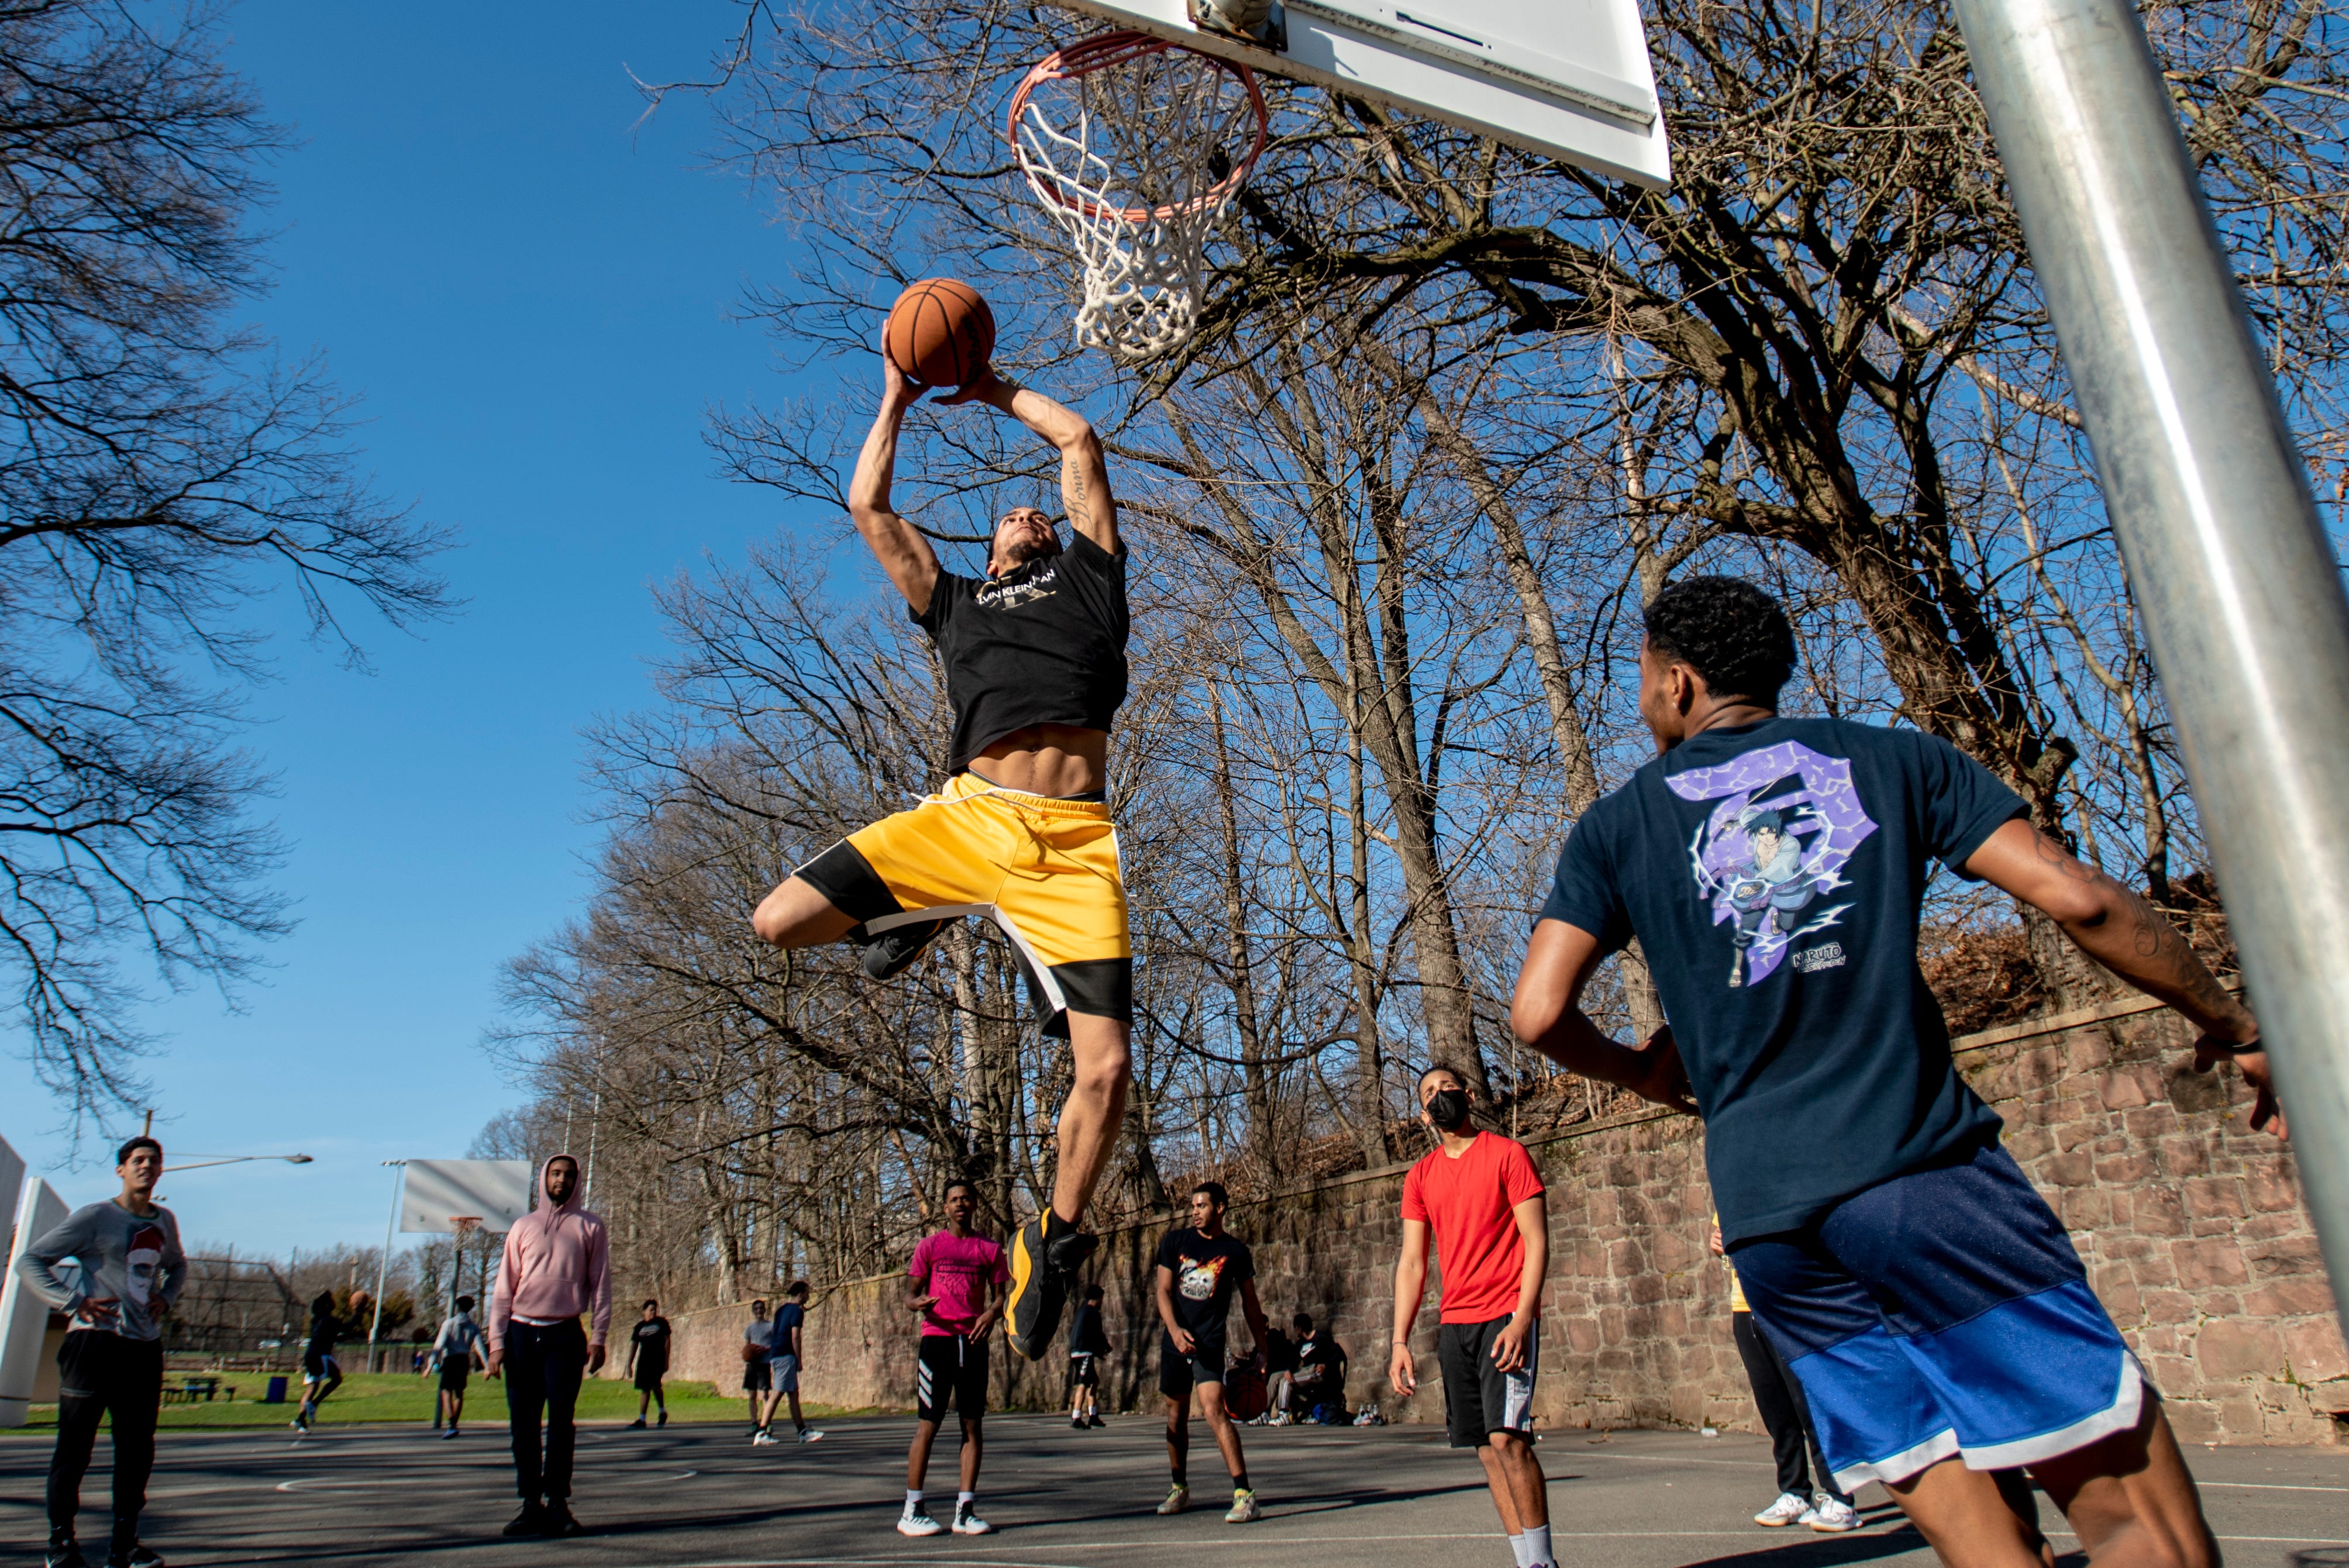 Anthony Rodriguez warms up before he plays basketball at the courts on Passaic Avenue in Passaic on Tuesday, March 30, 2021.